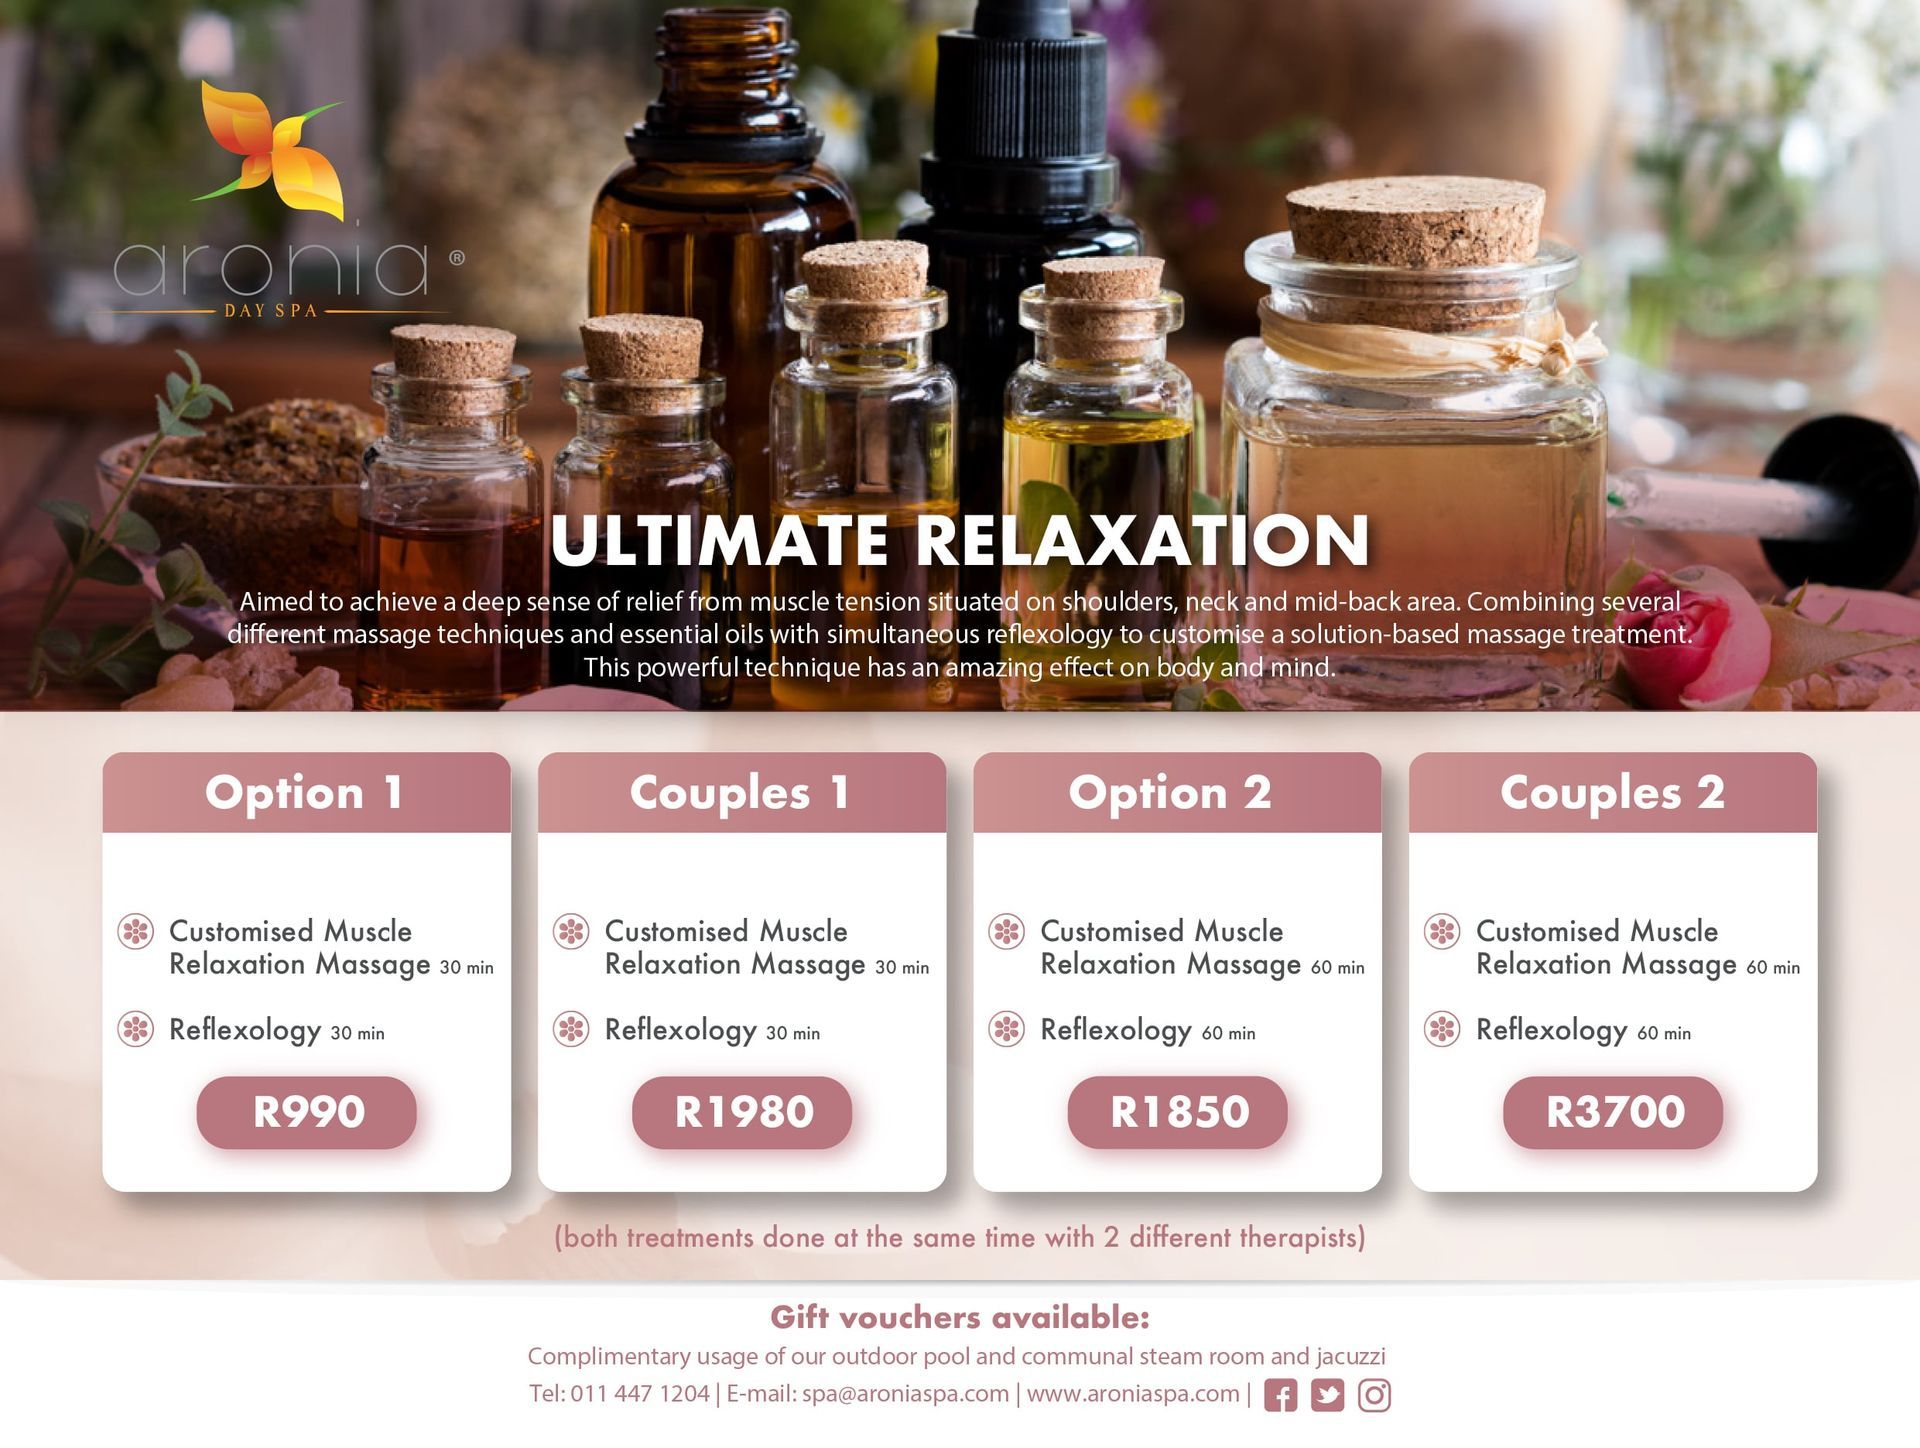 Aronia Day Spa ultimate relaxation stress free massage  spa